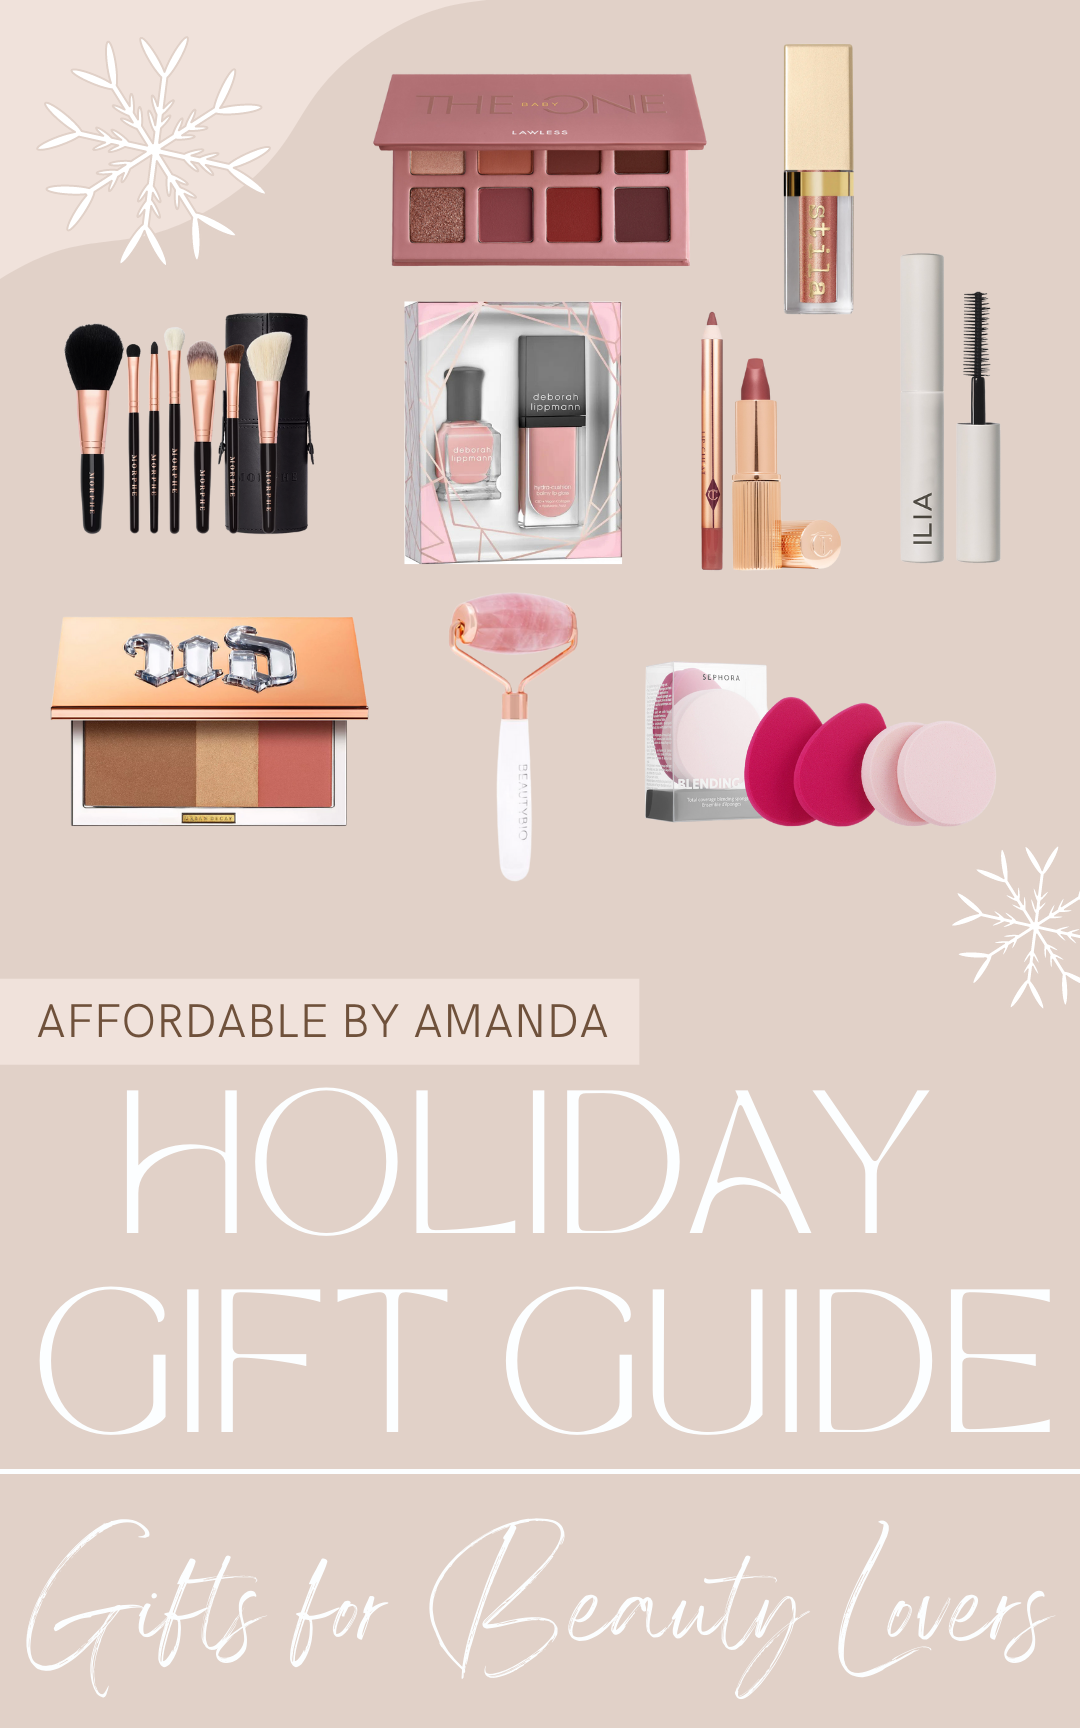 https://affordablebyamanda.com/wp-content/uploads/2021/10/holiday-gift-guide-beauty-lovers-e1634351327676.png